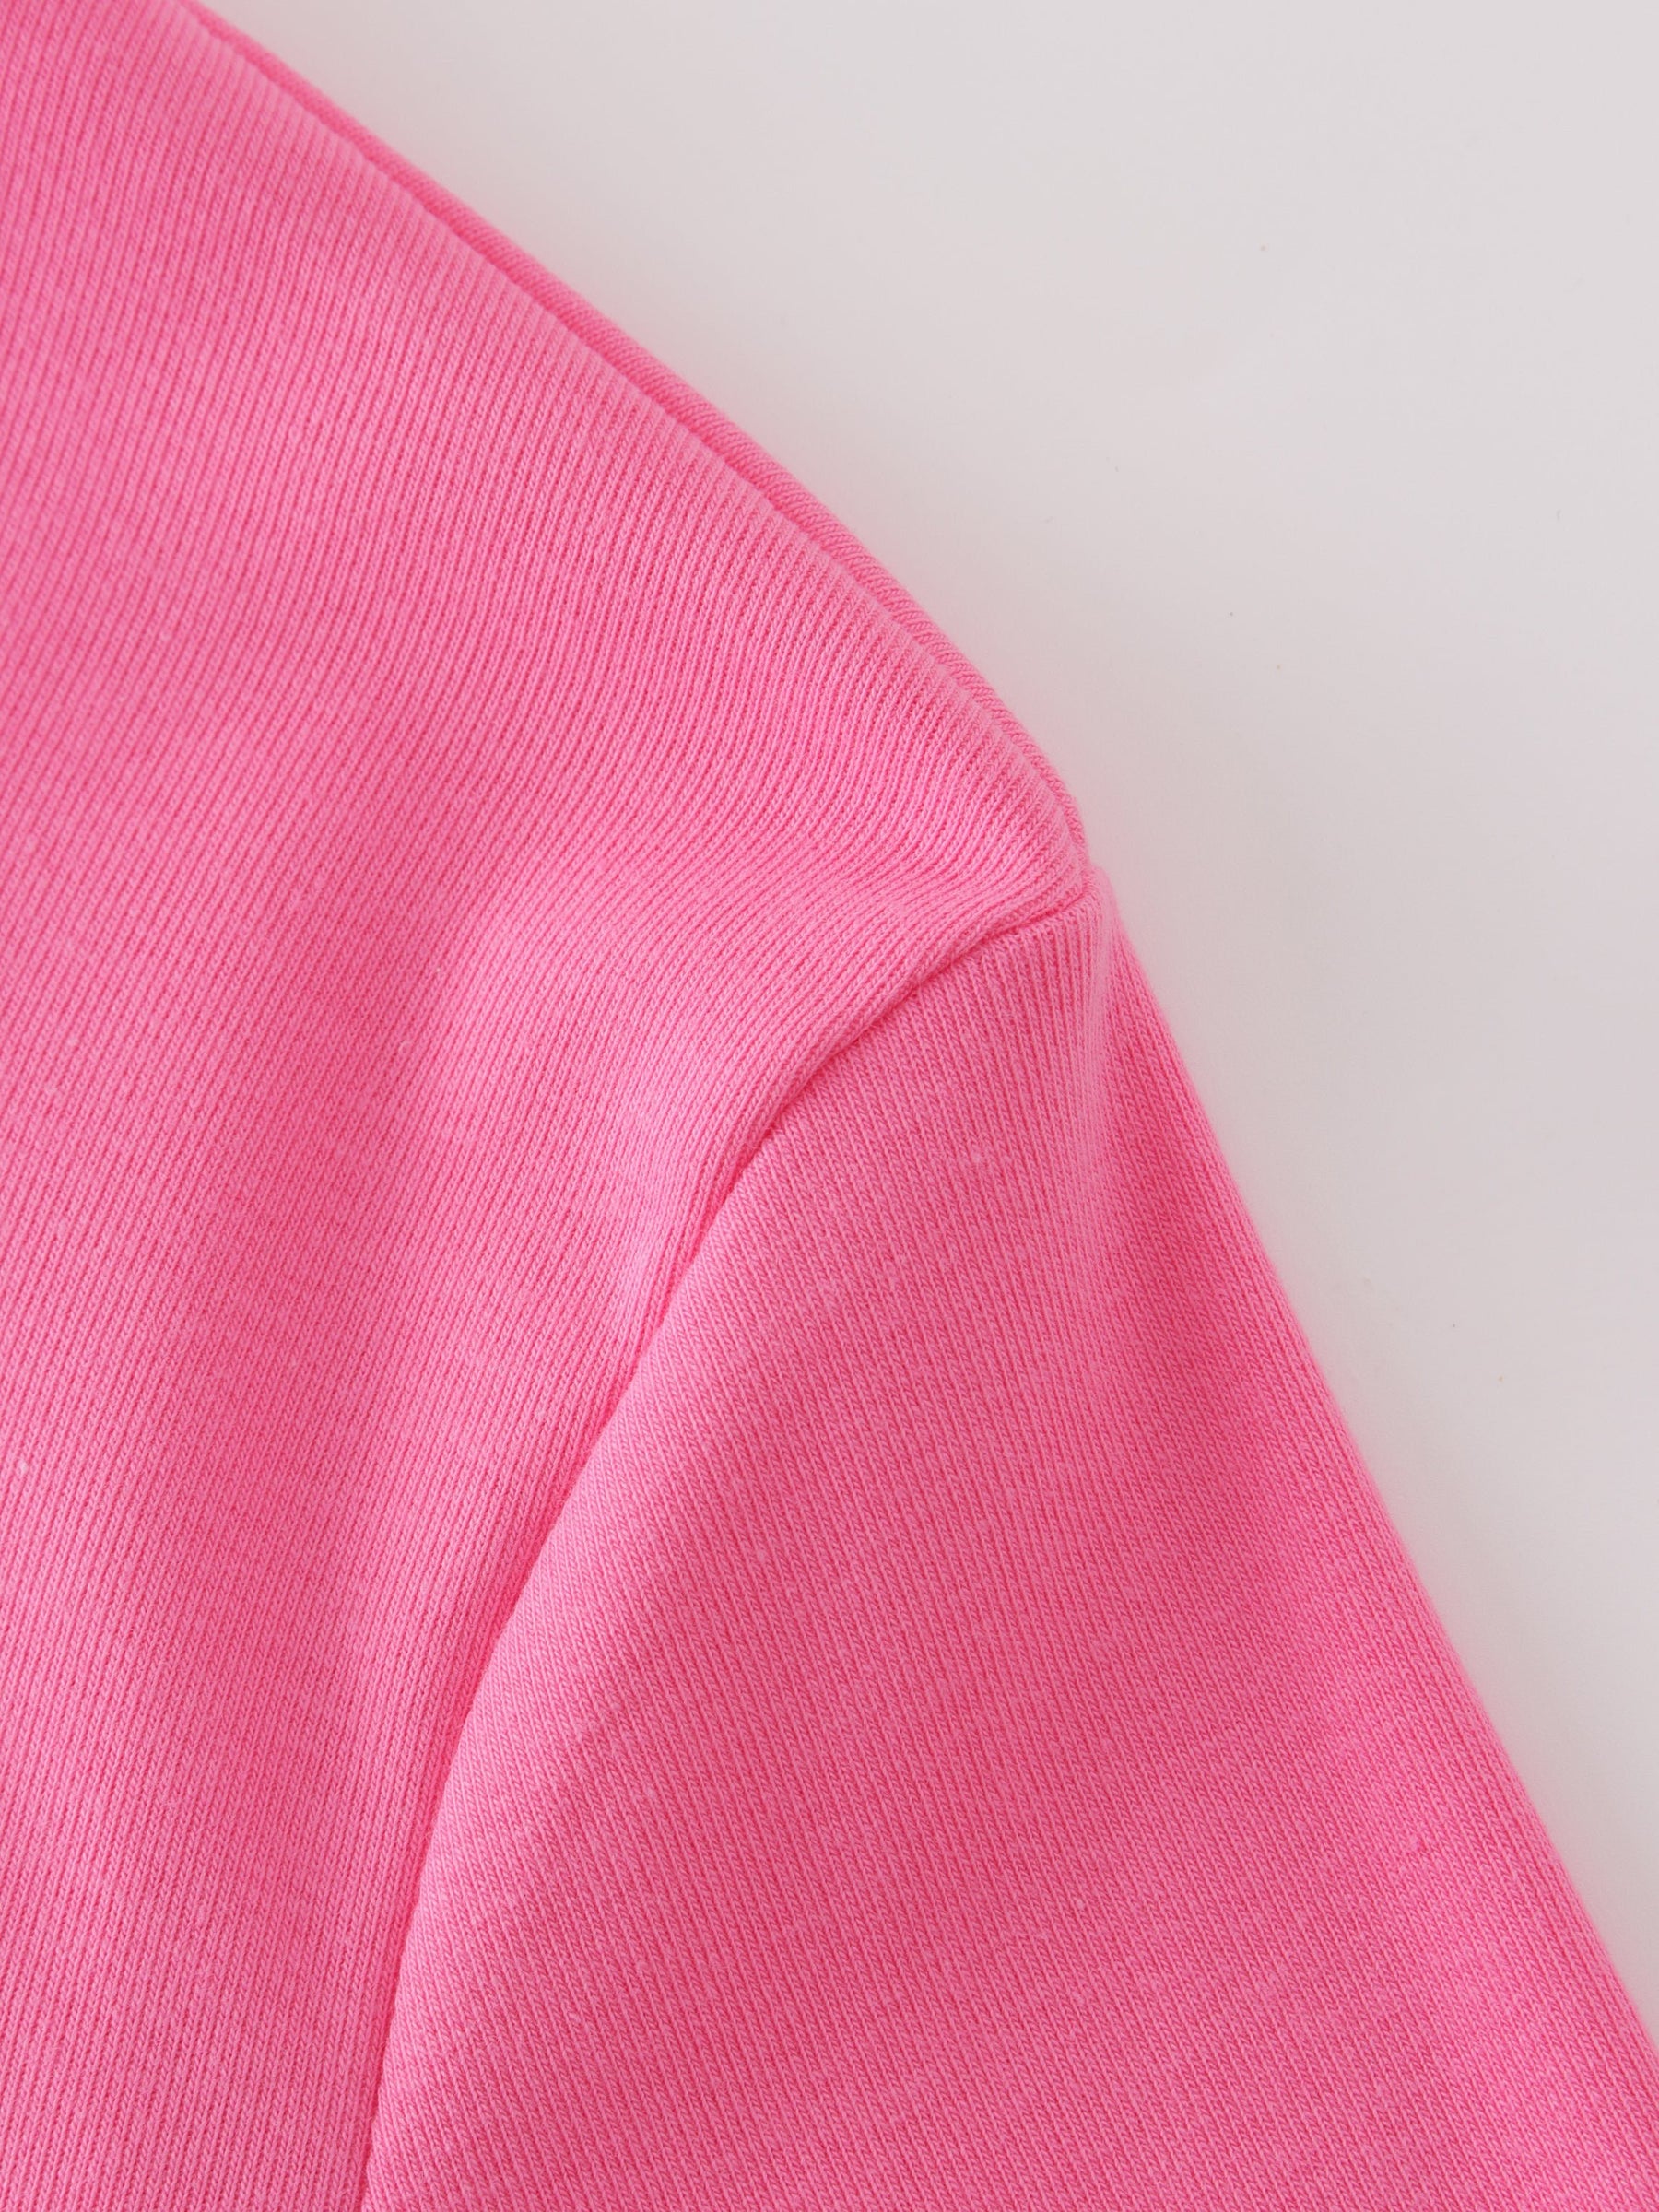 CLASSIC TEE LONG SLEEVE-BRIGHT PINK